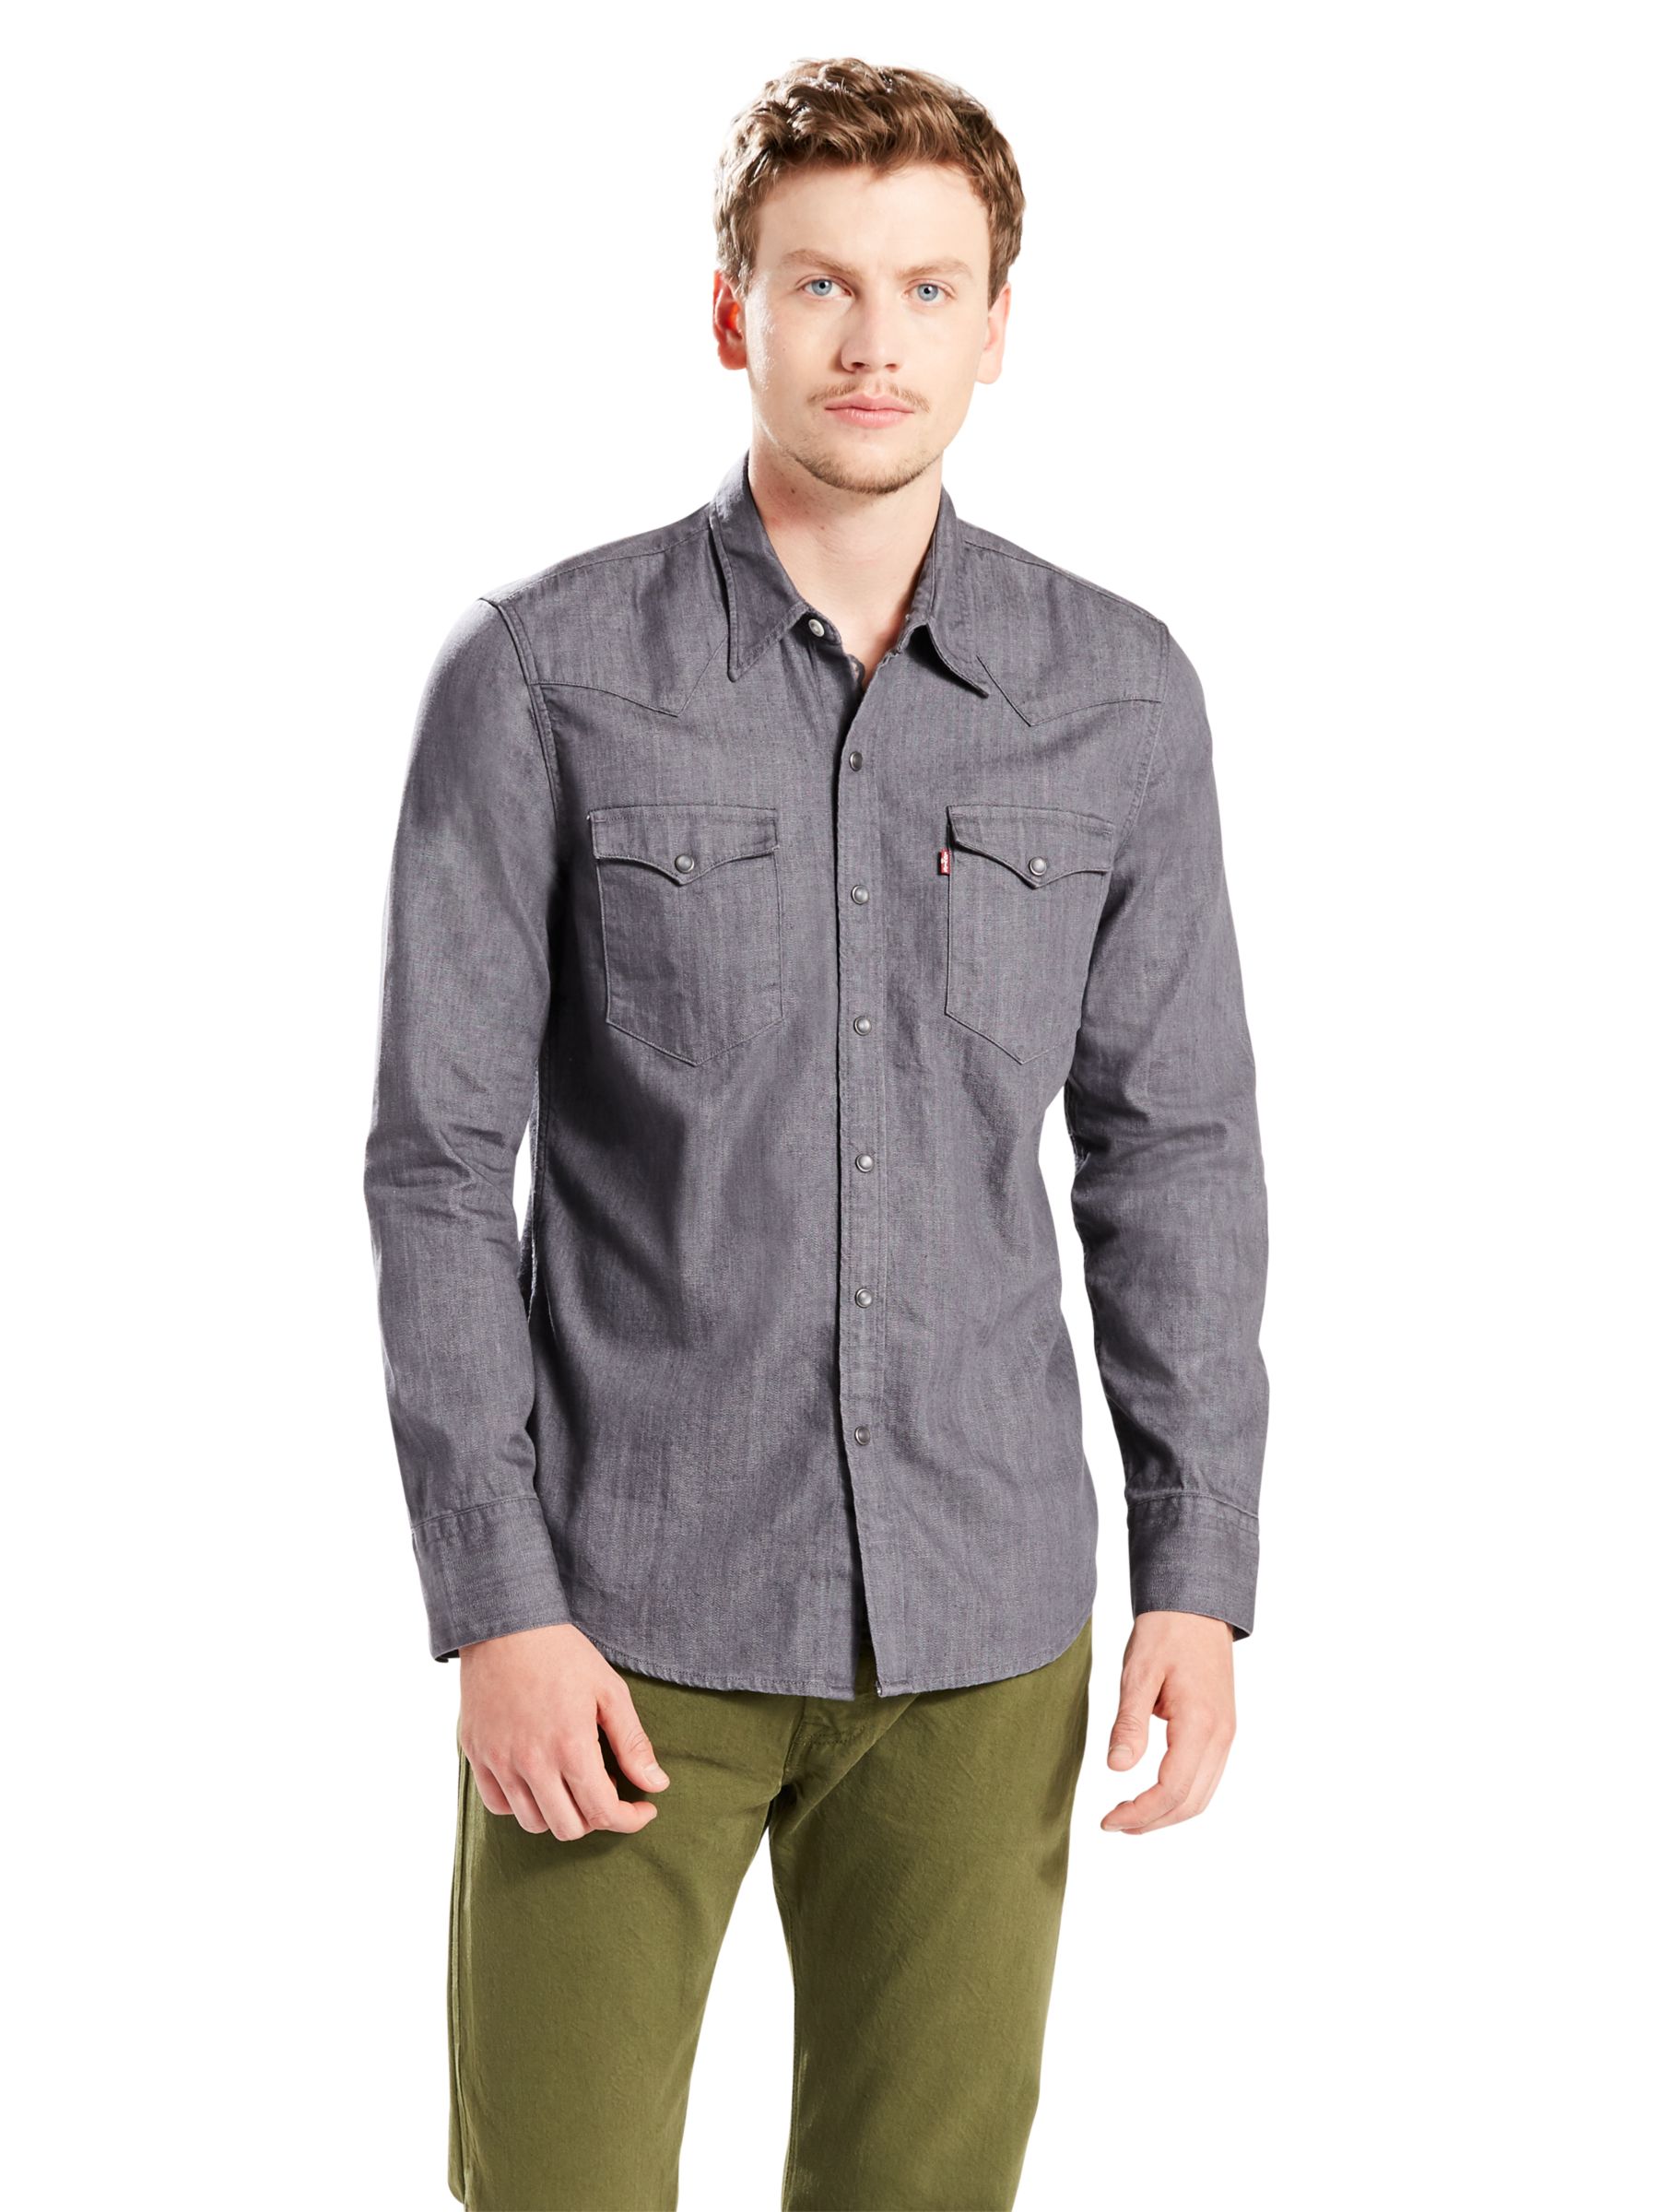 Levi's Barstow Western Shirt, Grey at 